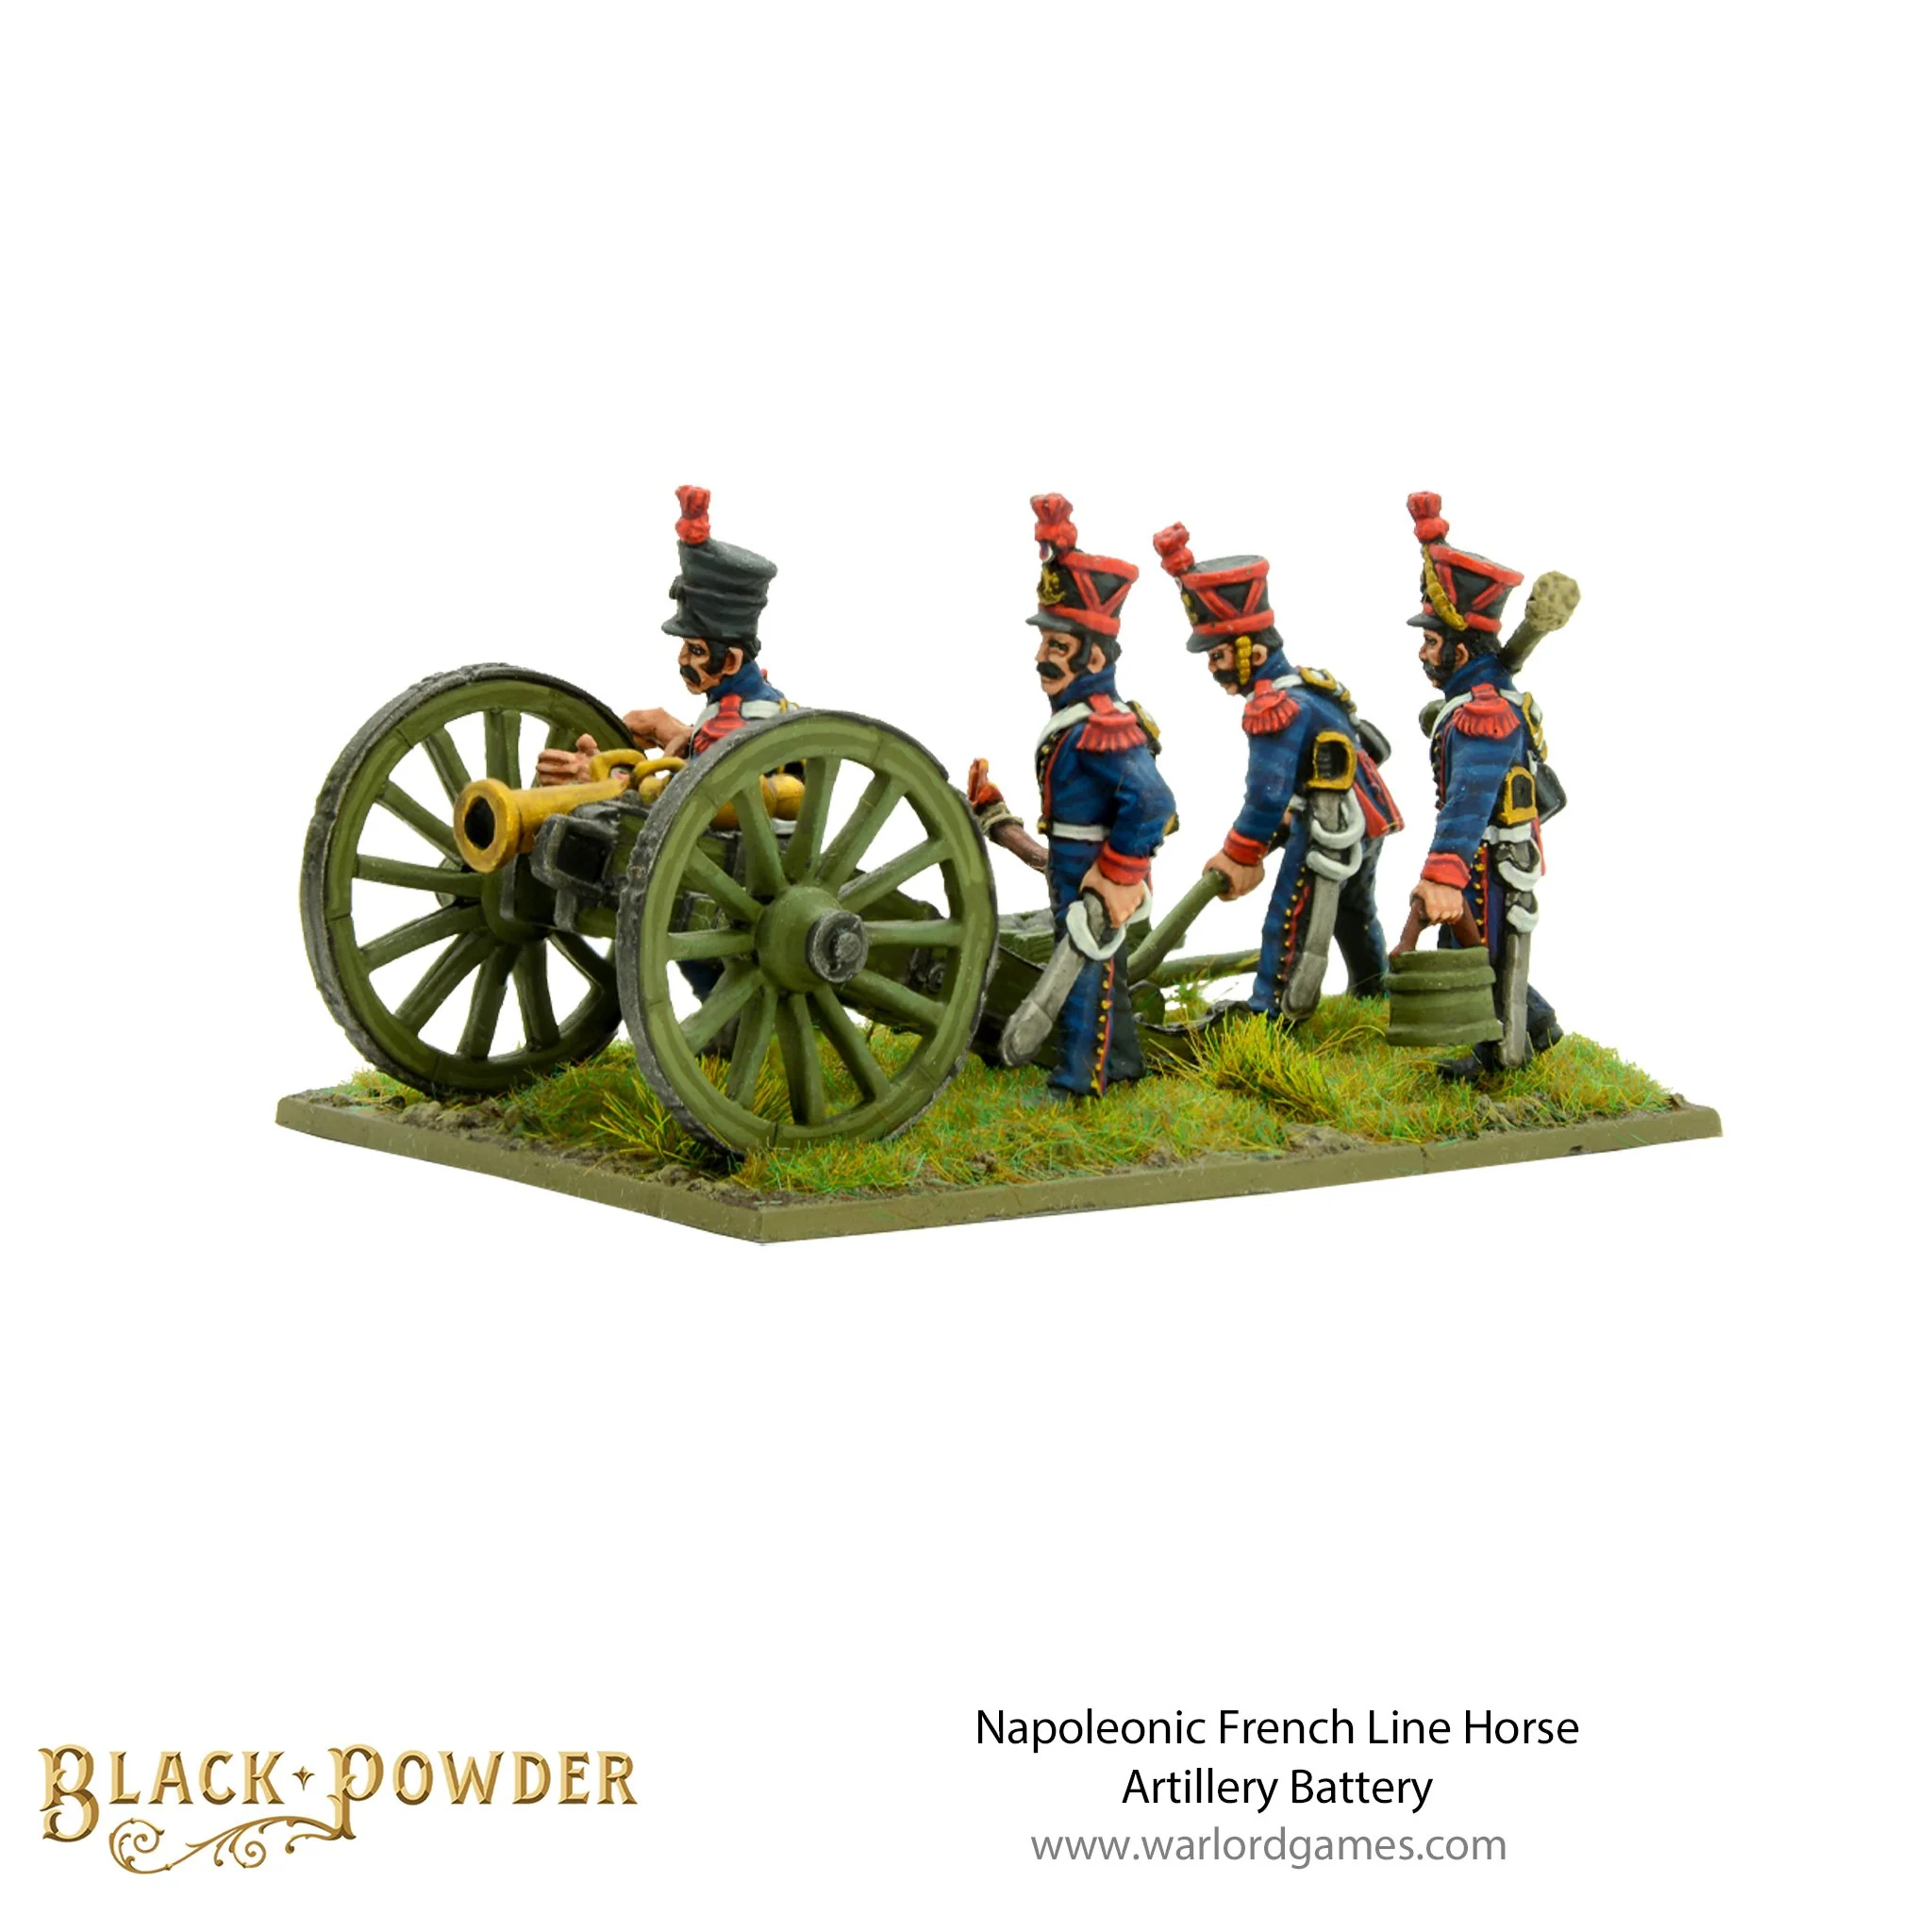 Napoleonic French Line Horse Artillery Battery-1710239509-sOW4B.webp